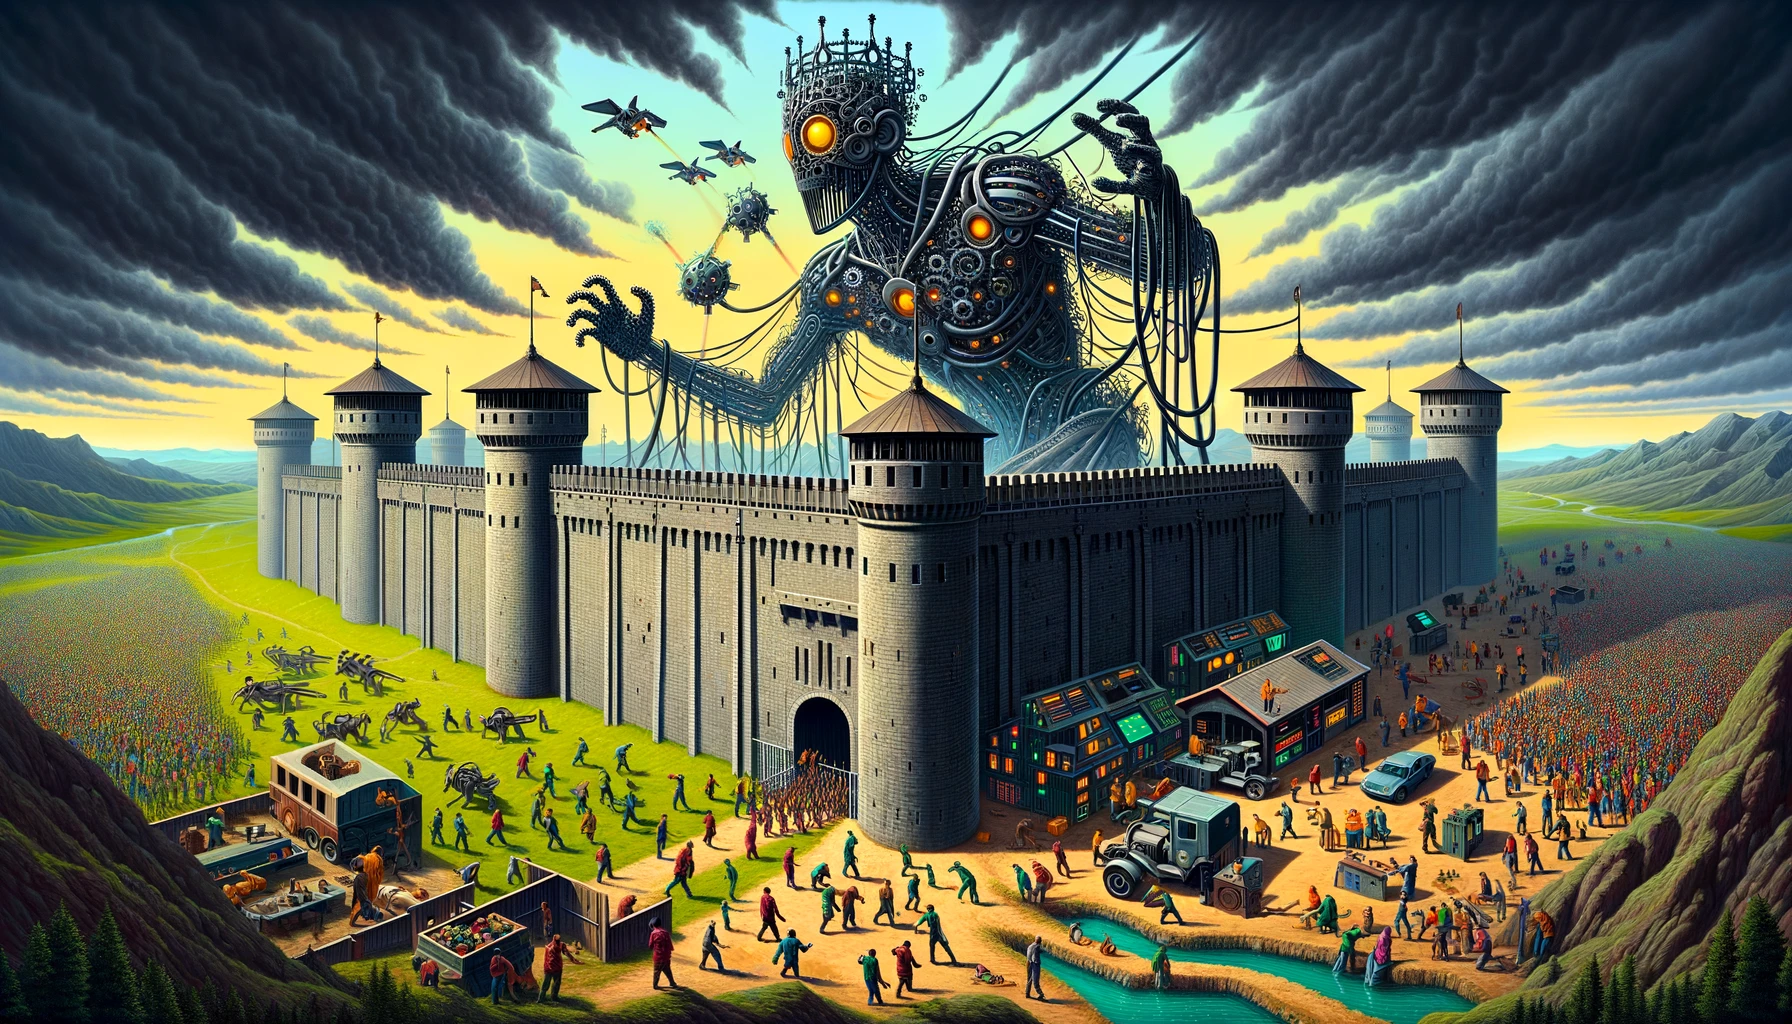 An imposing castle represents a tech giant's platform in a landscape, with chaos outside its walls as people are turned away, symbolizing rejected immigrants. Inside, occupants tear down workers' rights banners, while a monstrous AI figure made of gears and wires looms above, casting a shadow over workers who train it before being dismissed. In the background, a graveyard of cars and bank vaults symbolizes the failure of technological promises, illustrating the consequences of vendor lock-in and the illusion of progress.